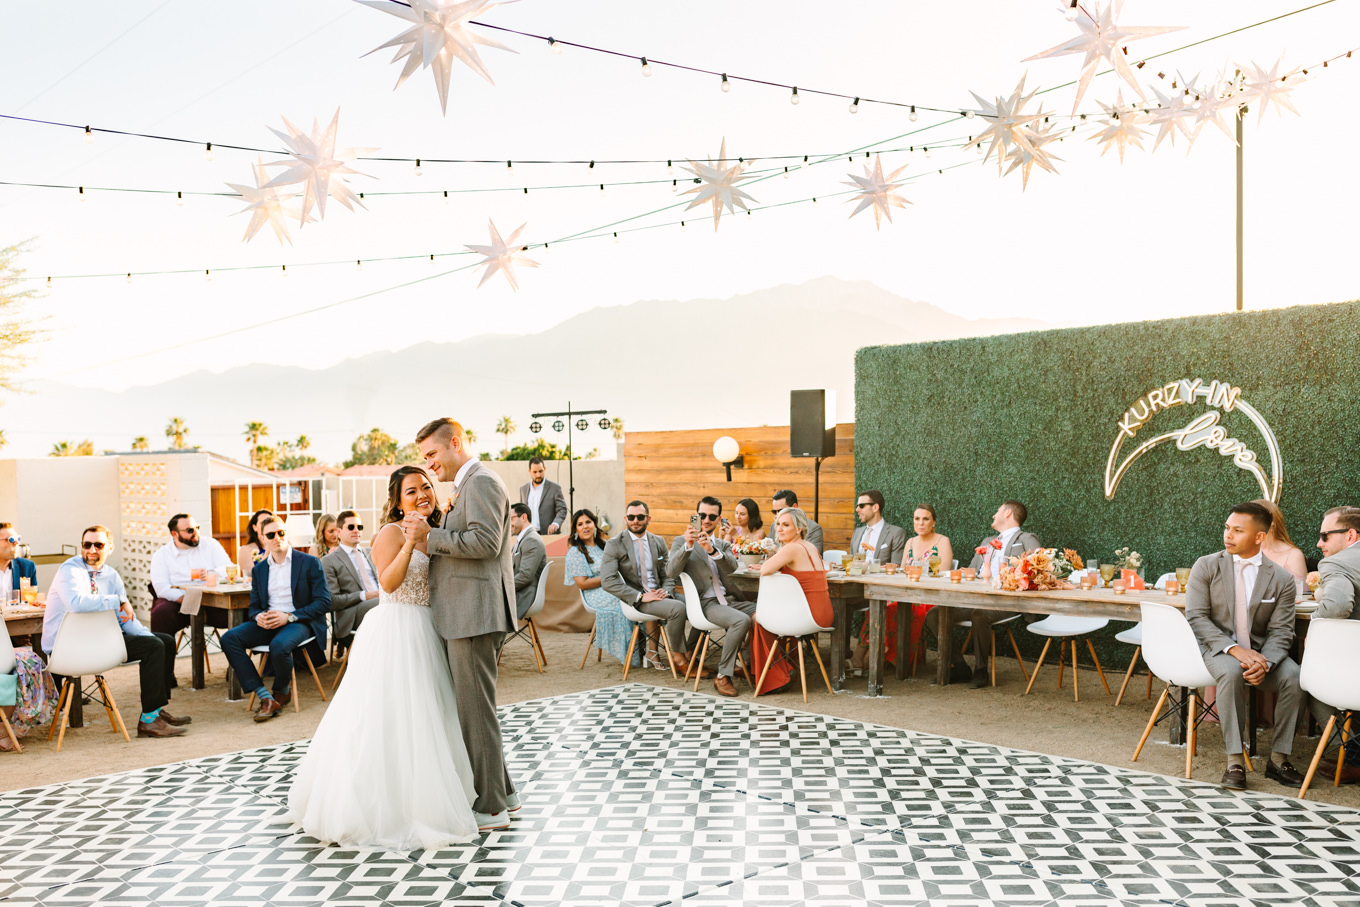 Bride and groom first dance | Pink and orange Lautner Compound wedding | Colorful Palm Springs wedding photography | #palmspringsphotographer #palmspringswedding #lautnercompound #southerncaliforniawedding  Source: Mary Costa Photography | Los Angeles